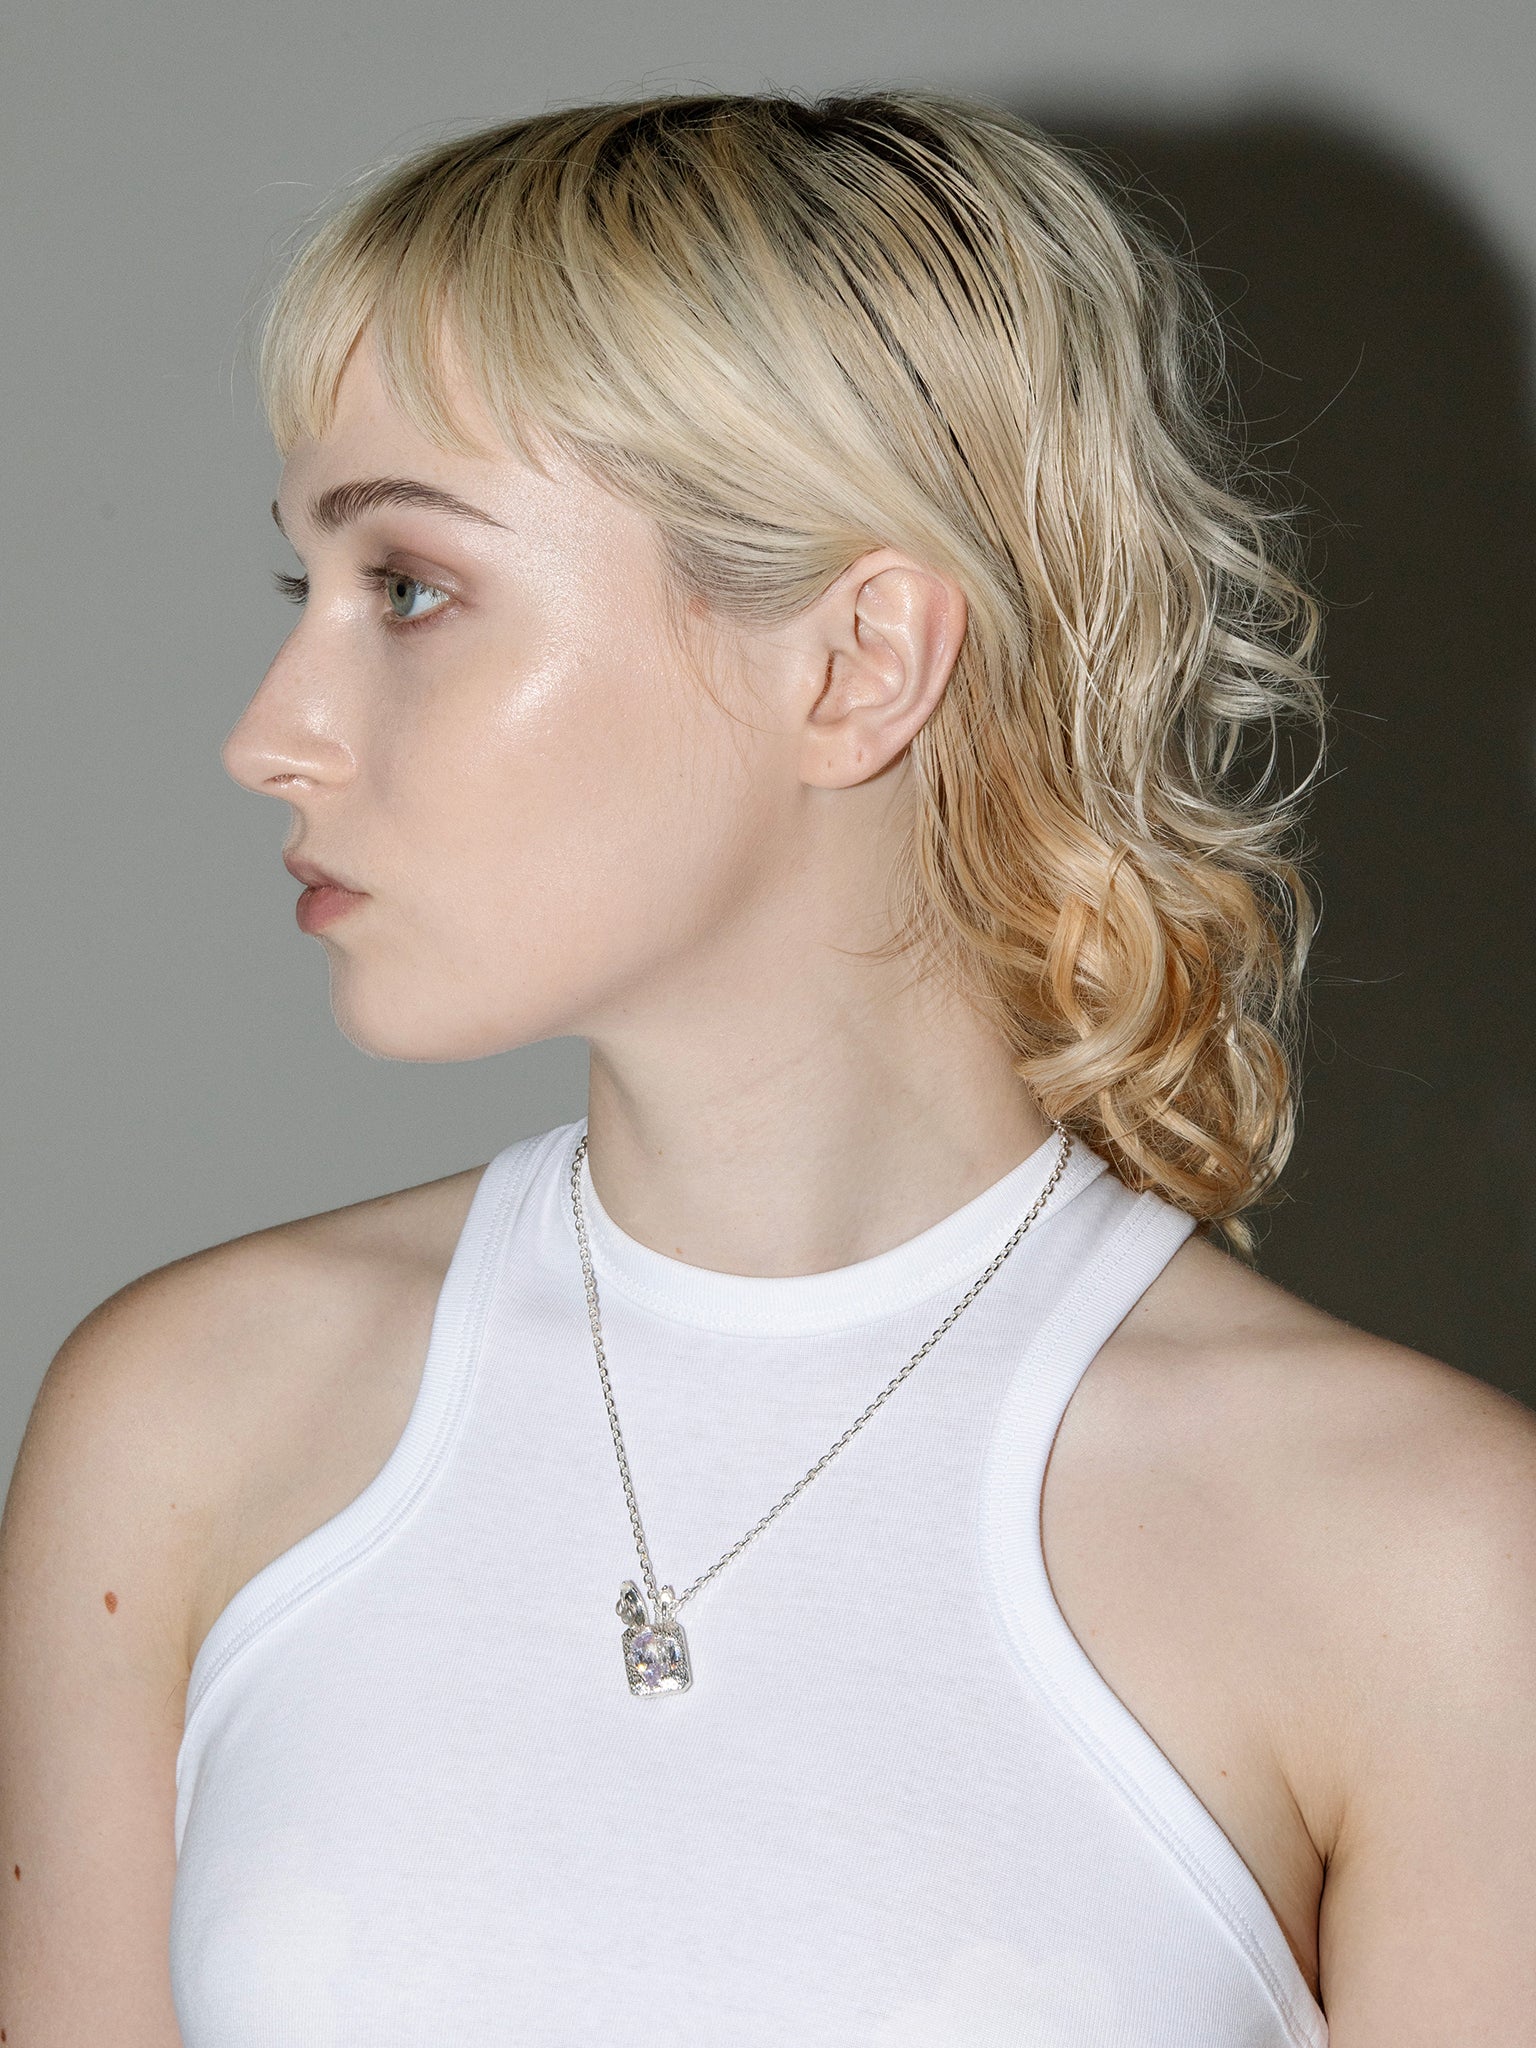 SILVER METAL ZONG NECKLACE - WILD HARE EDITION (CLEAR STONE)